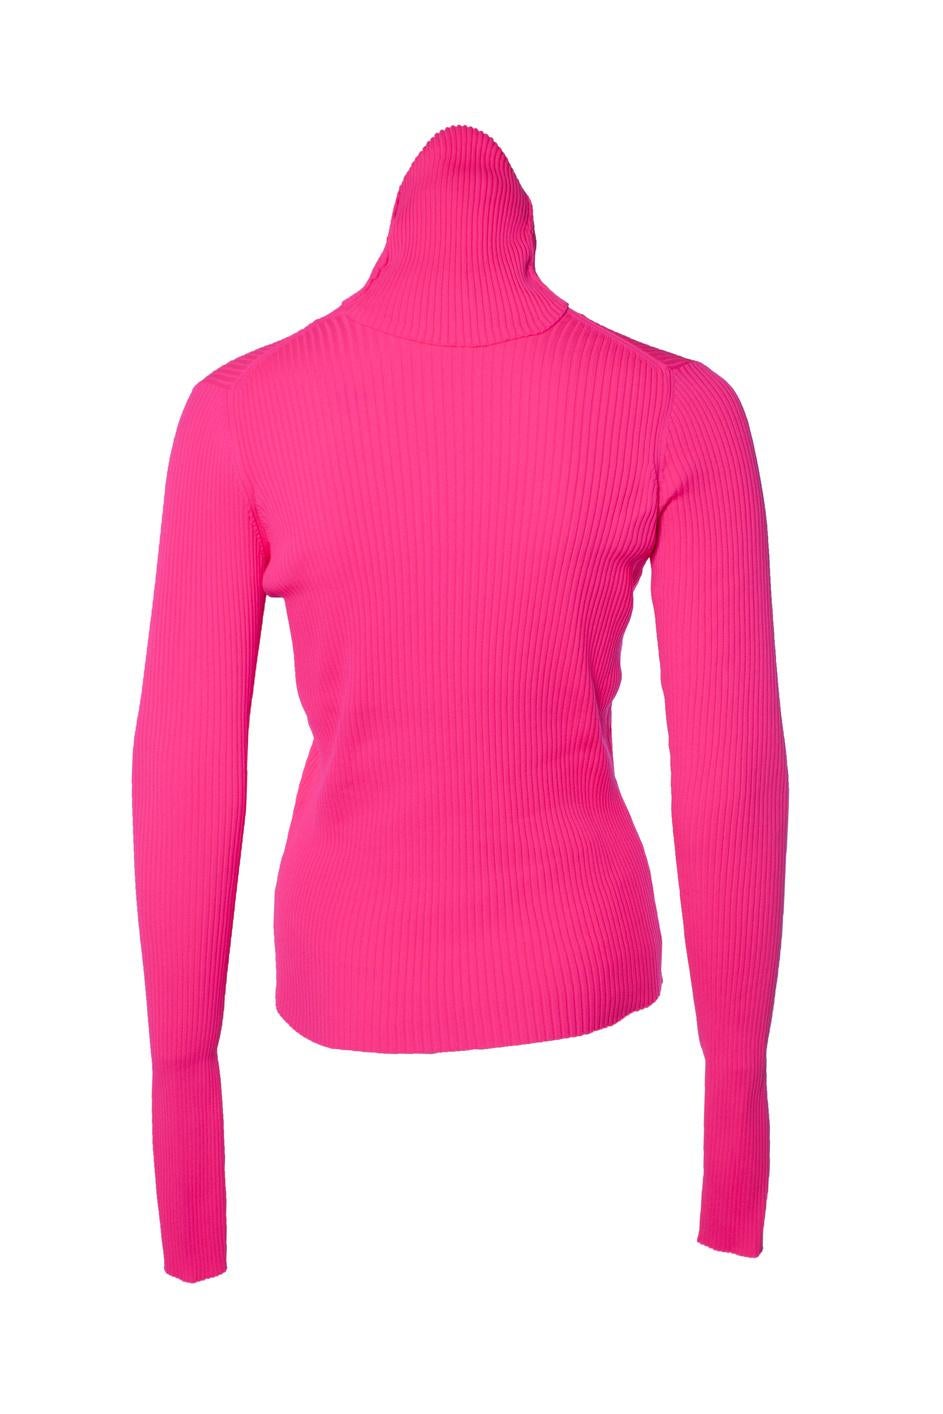 Balenciaga, Neon pink rib turtle neck. The item is in very good condition. (Stretch)

• CONDITION: very good condition 

• SIZE: S 

• MEASUREMENTS: length 58 cm, width 35 cm, waist 32 cm, shoulder width 35 cm, sleeve length 66 cm

• MATERIAL: 100%